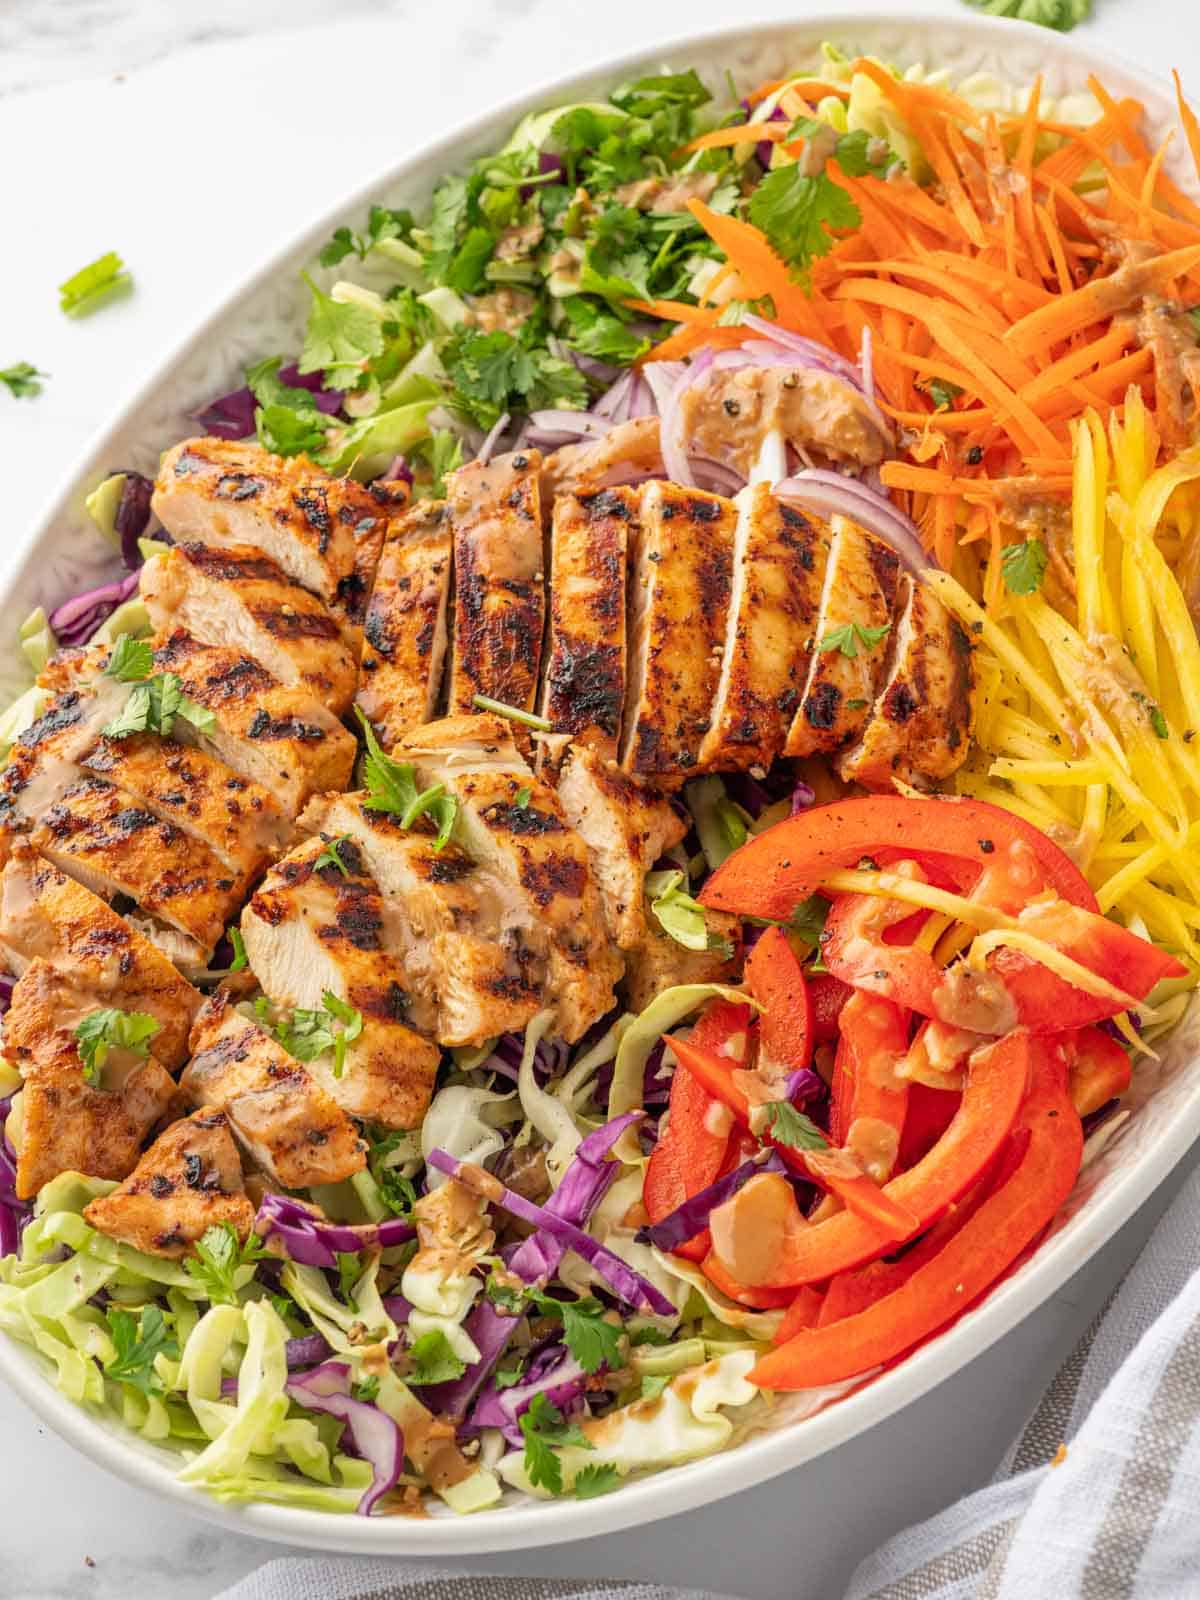 Sliced grilled chicken and mango salad.